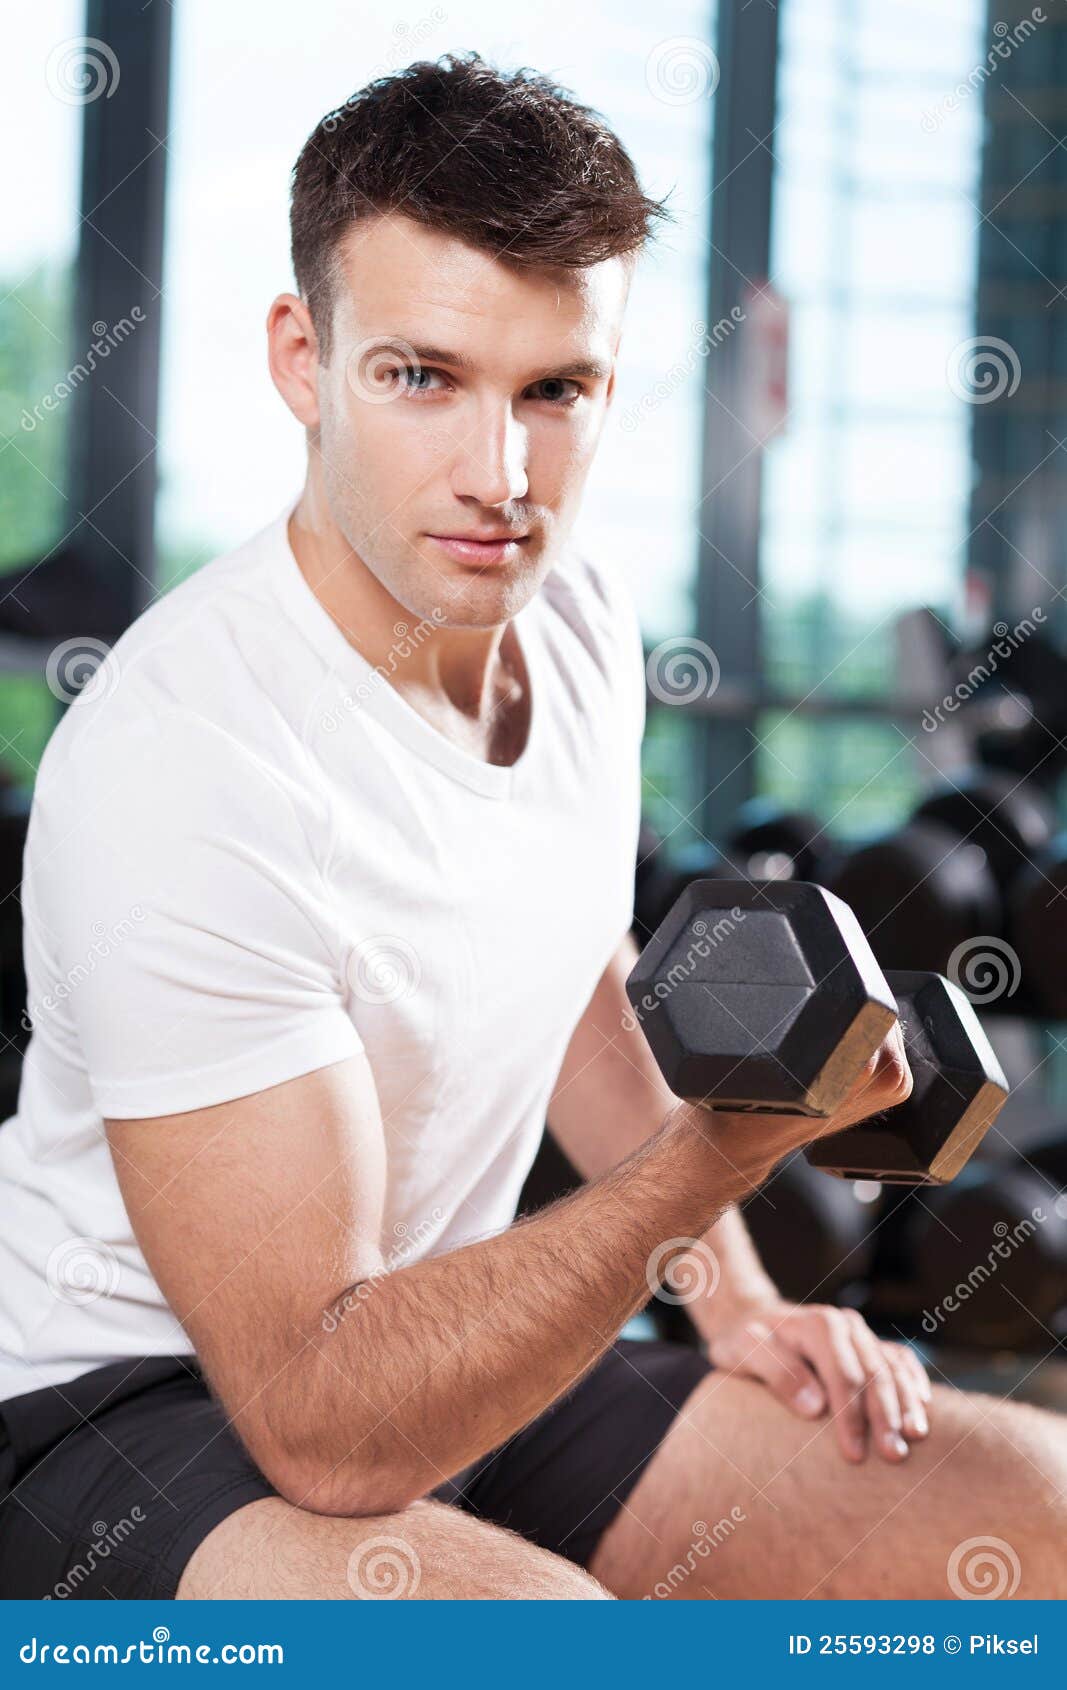 Man Lifting Dumbbell stock photo. Image of person, dumbbell - 25593298